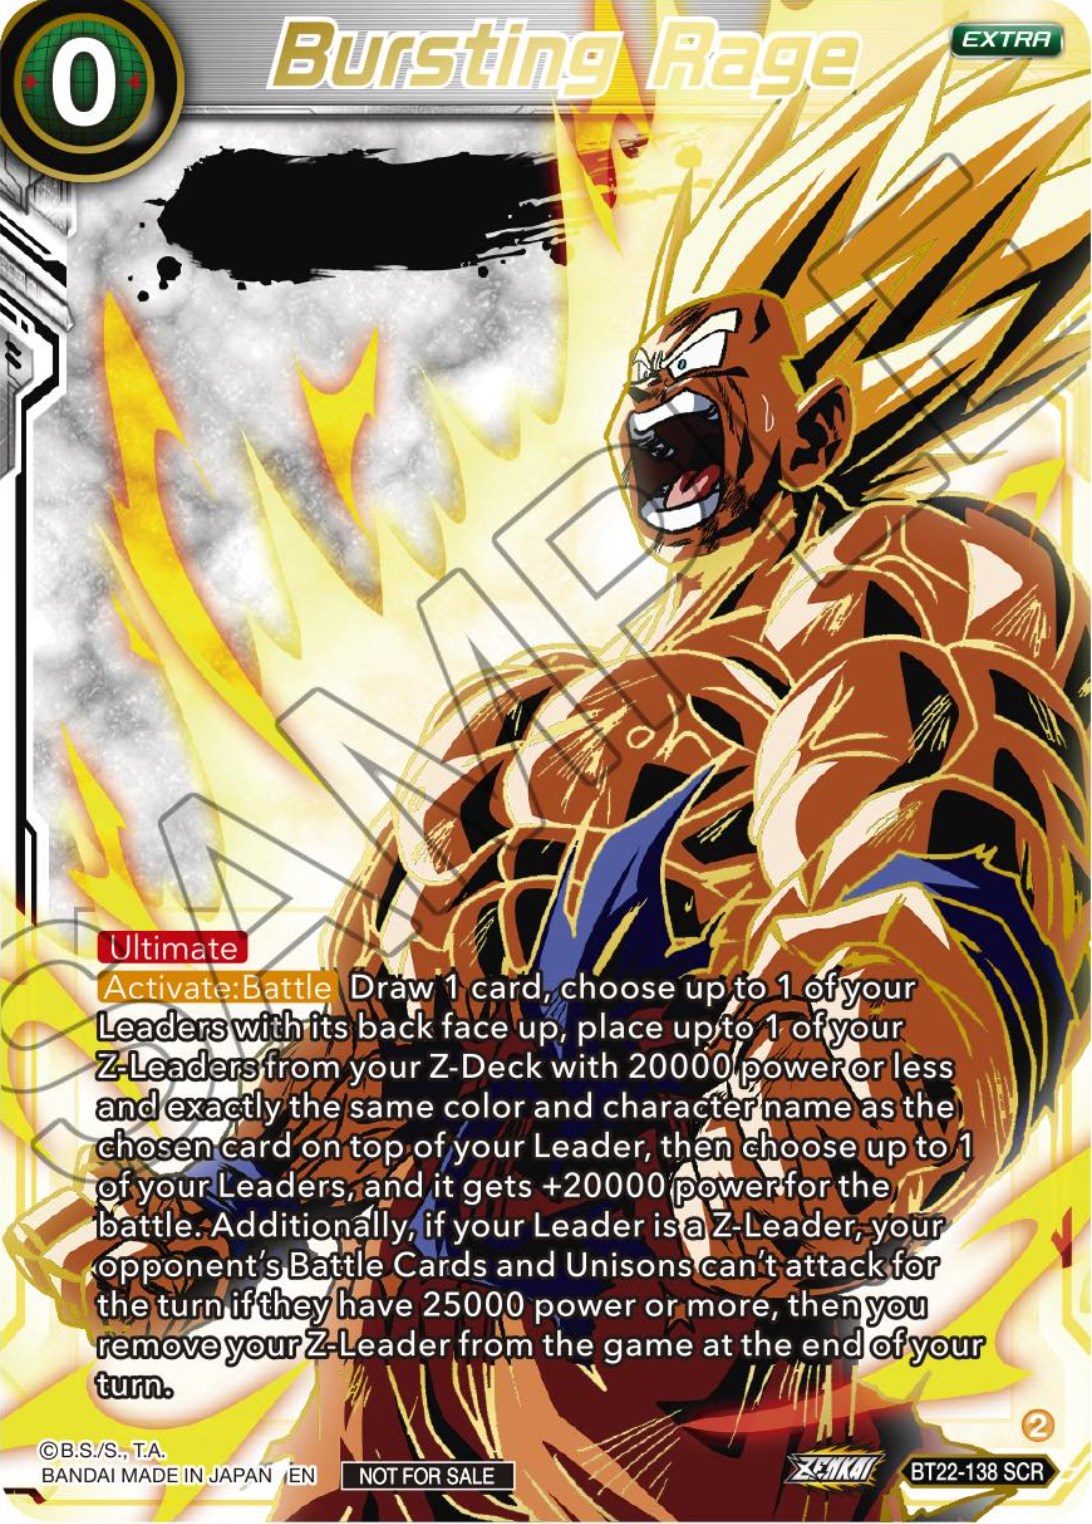 Bursting Rage (Serial Numbered) (BT22-138) [Tournament Promotion Cards] | Sanctuary Gaming